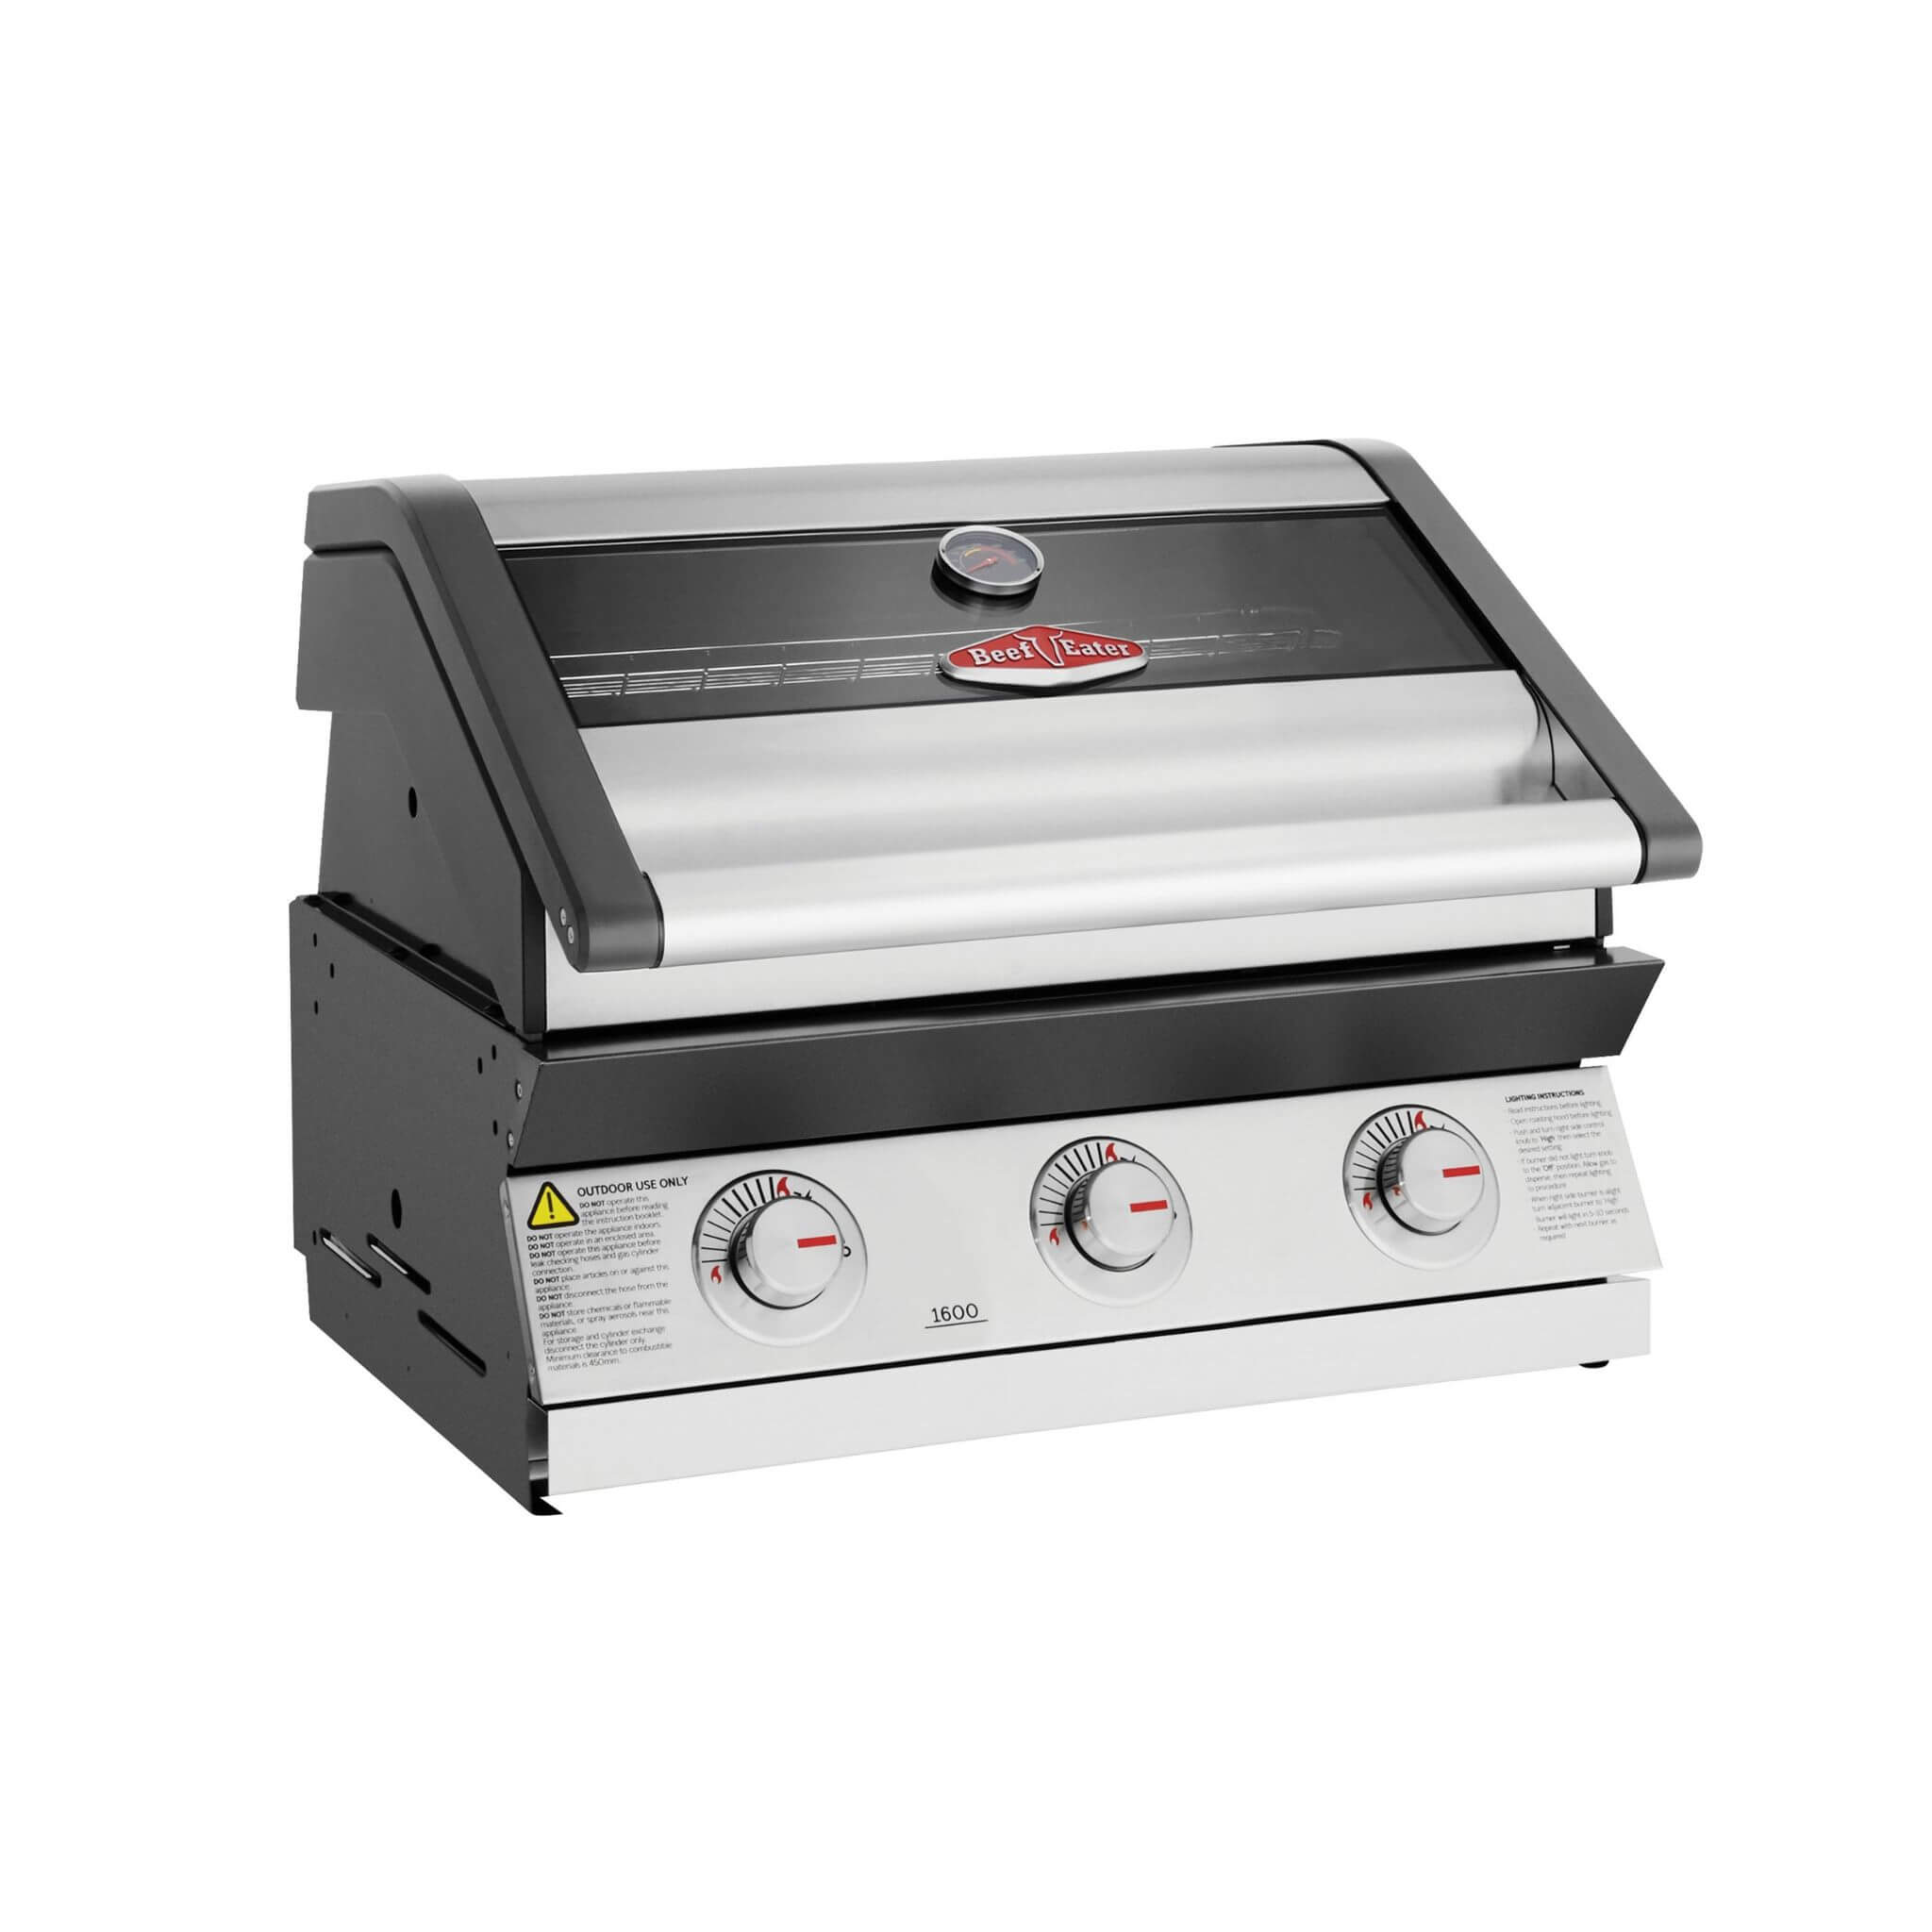 BeefEater Discovery 1600 Series - 3 Burner Built In Gas BBQ (Dark Grey Enamel or Stainless Steel)